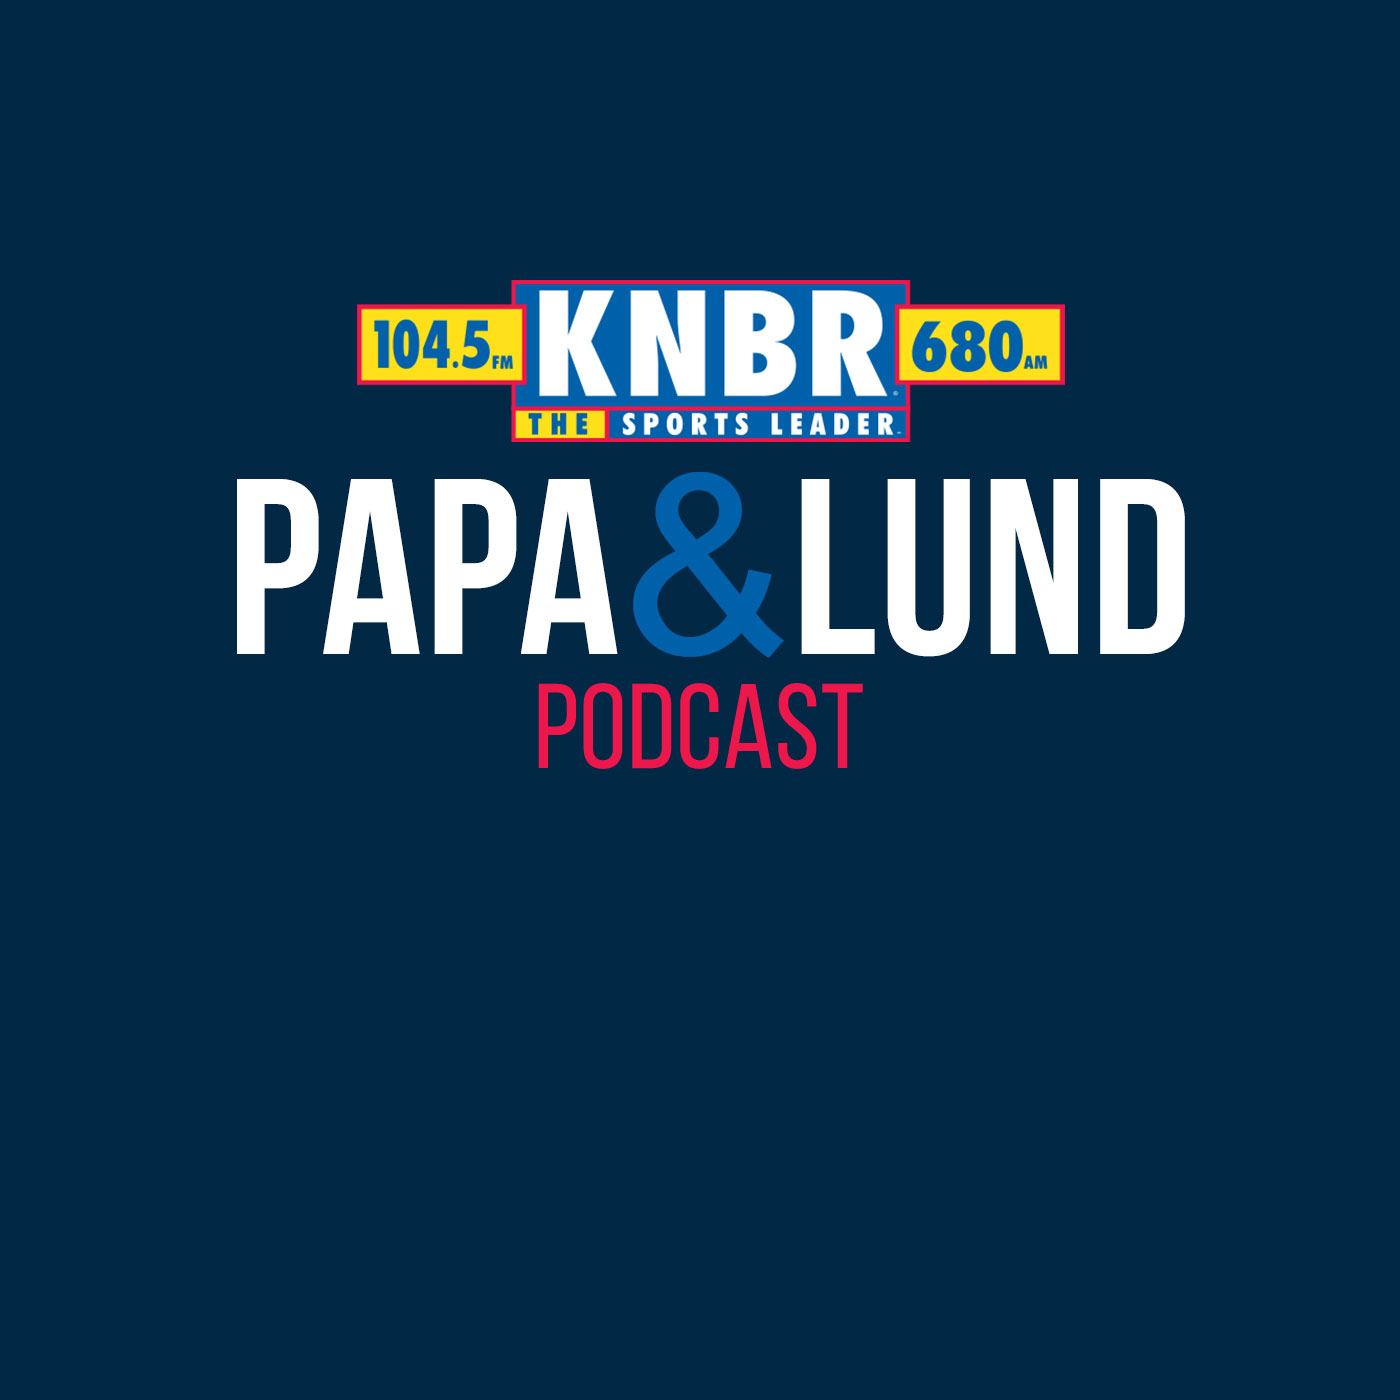 12-11 Donte Whitner joins Papa & Lund to discuss Ji' Ayir impressive play in the secondary as well as the importance of the 49ers getting and holding on to the #1 seed in the NFC